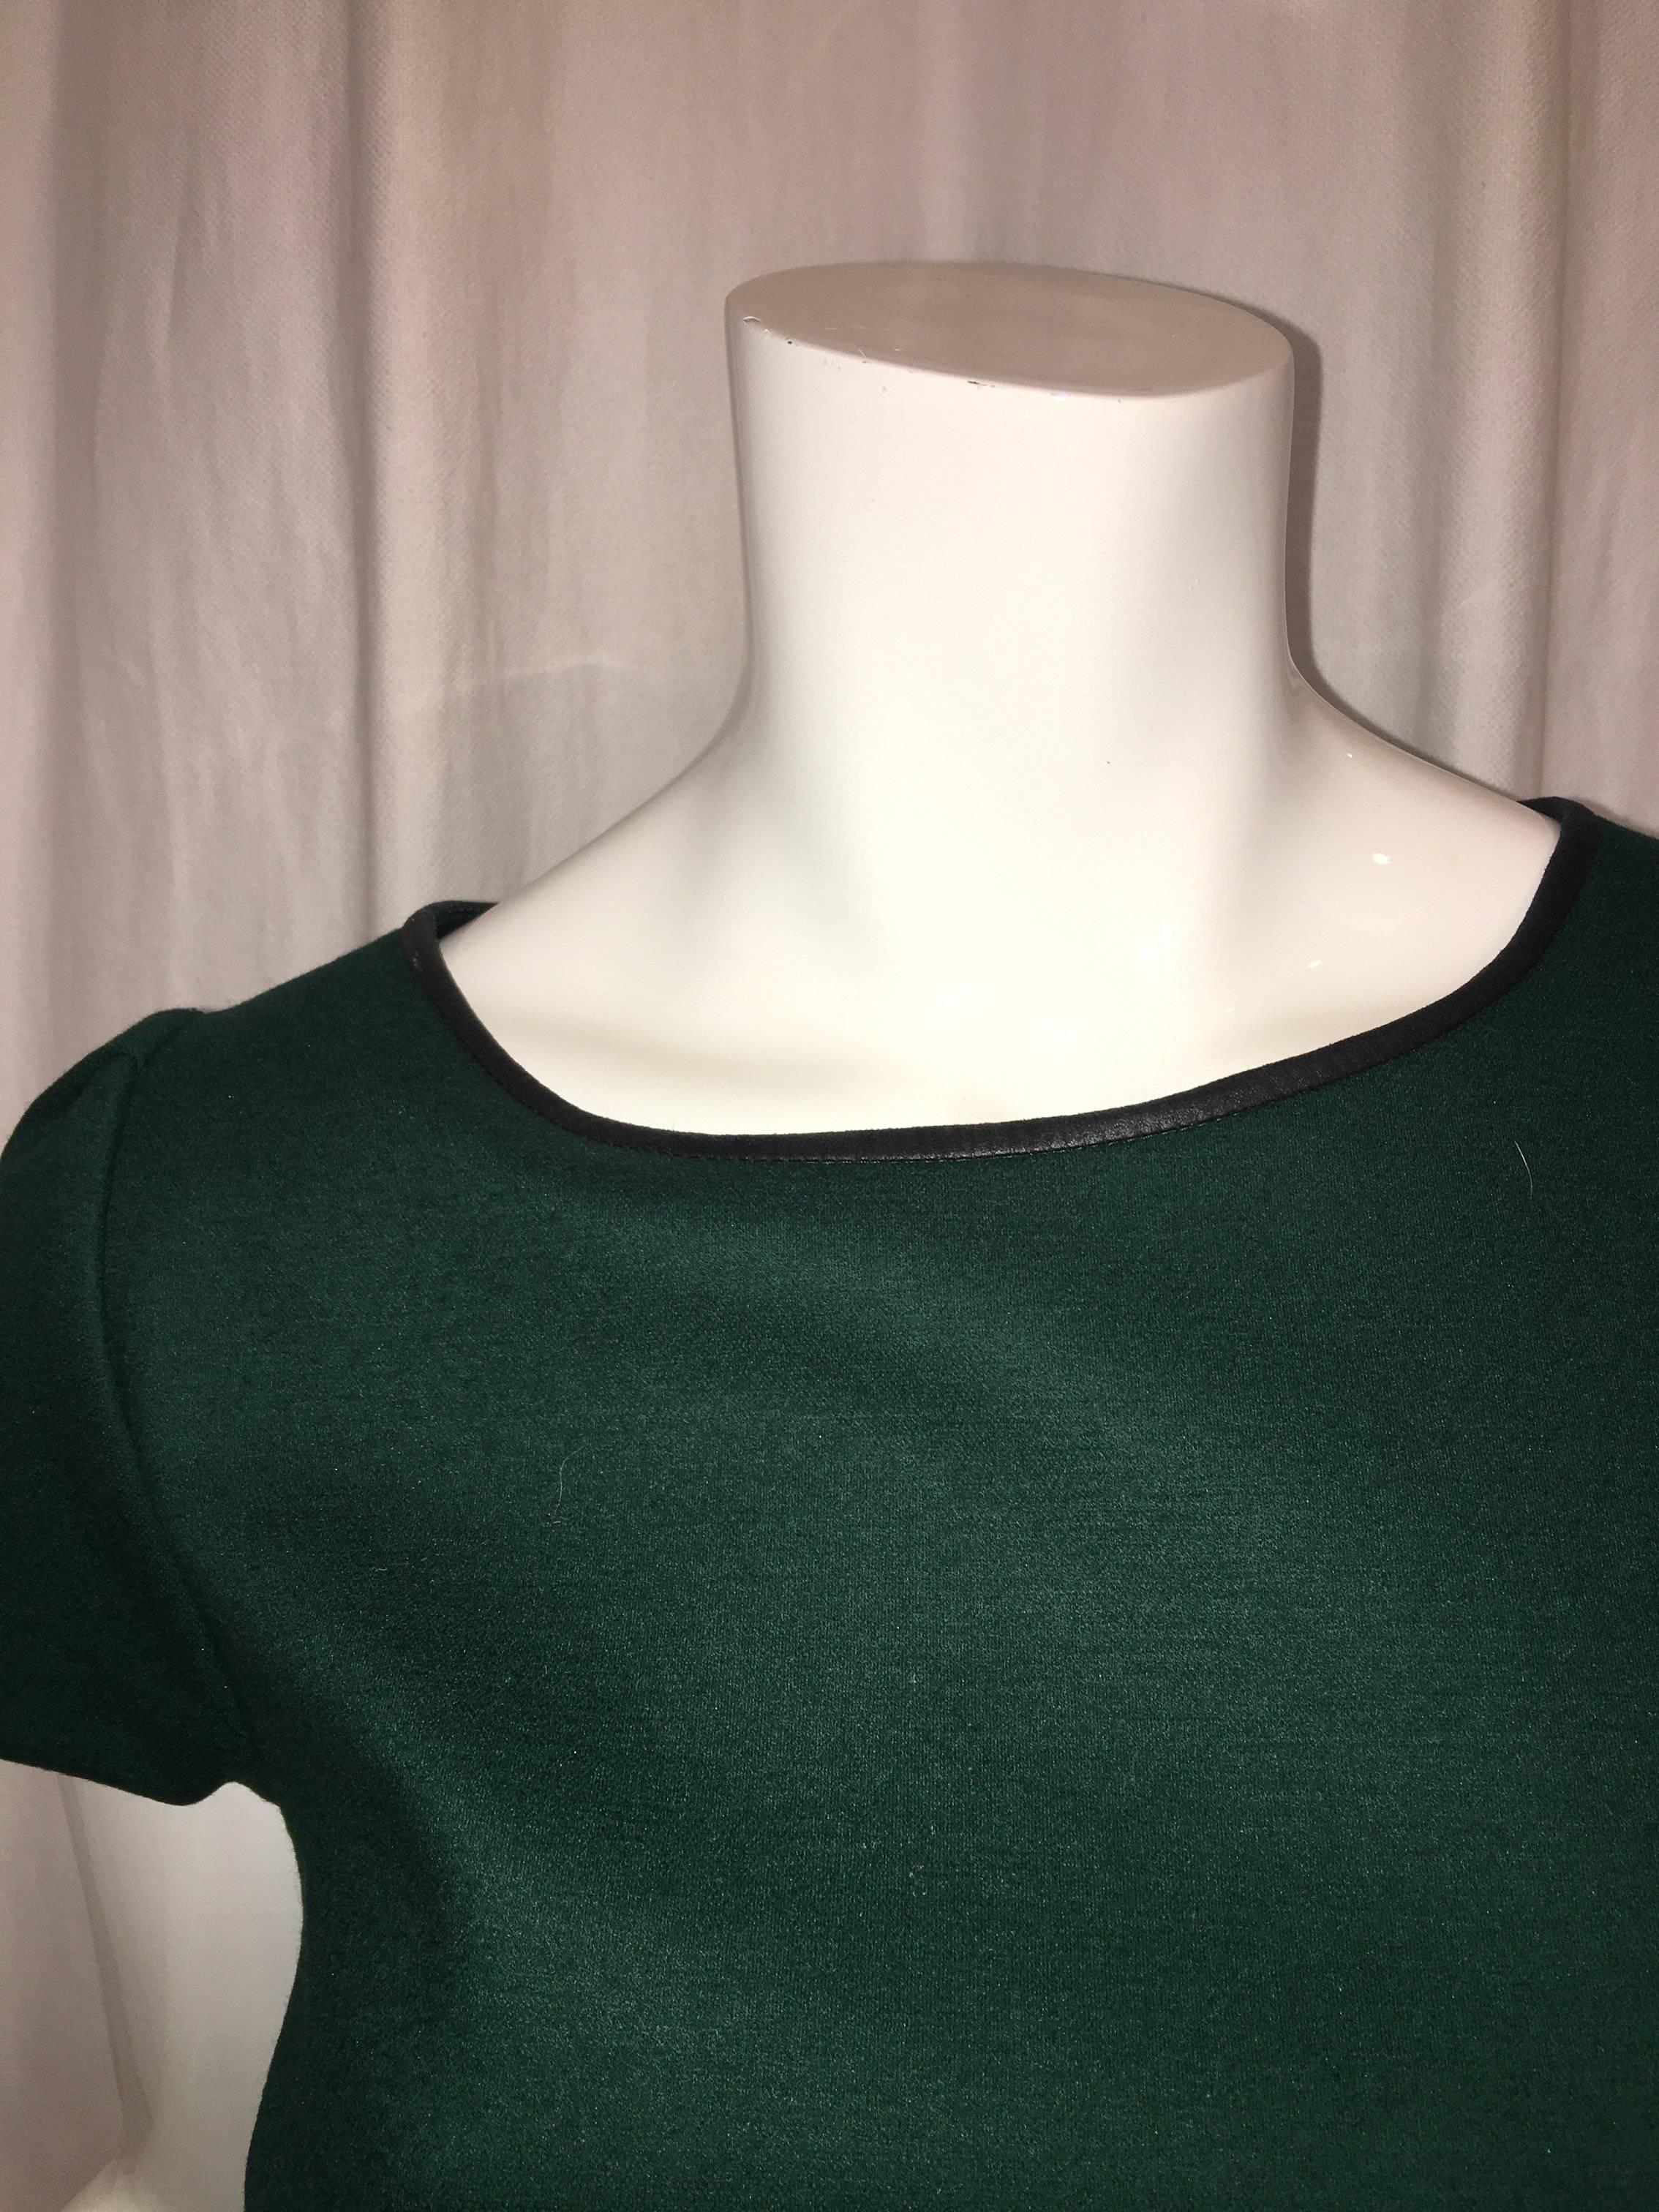 Elie Tahari Emerald Wool Dress with Cap Sleeves, Leather Neck Lining and Back Zipper.